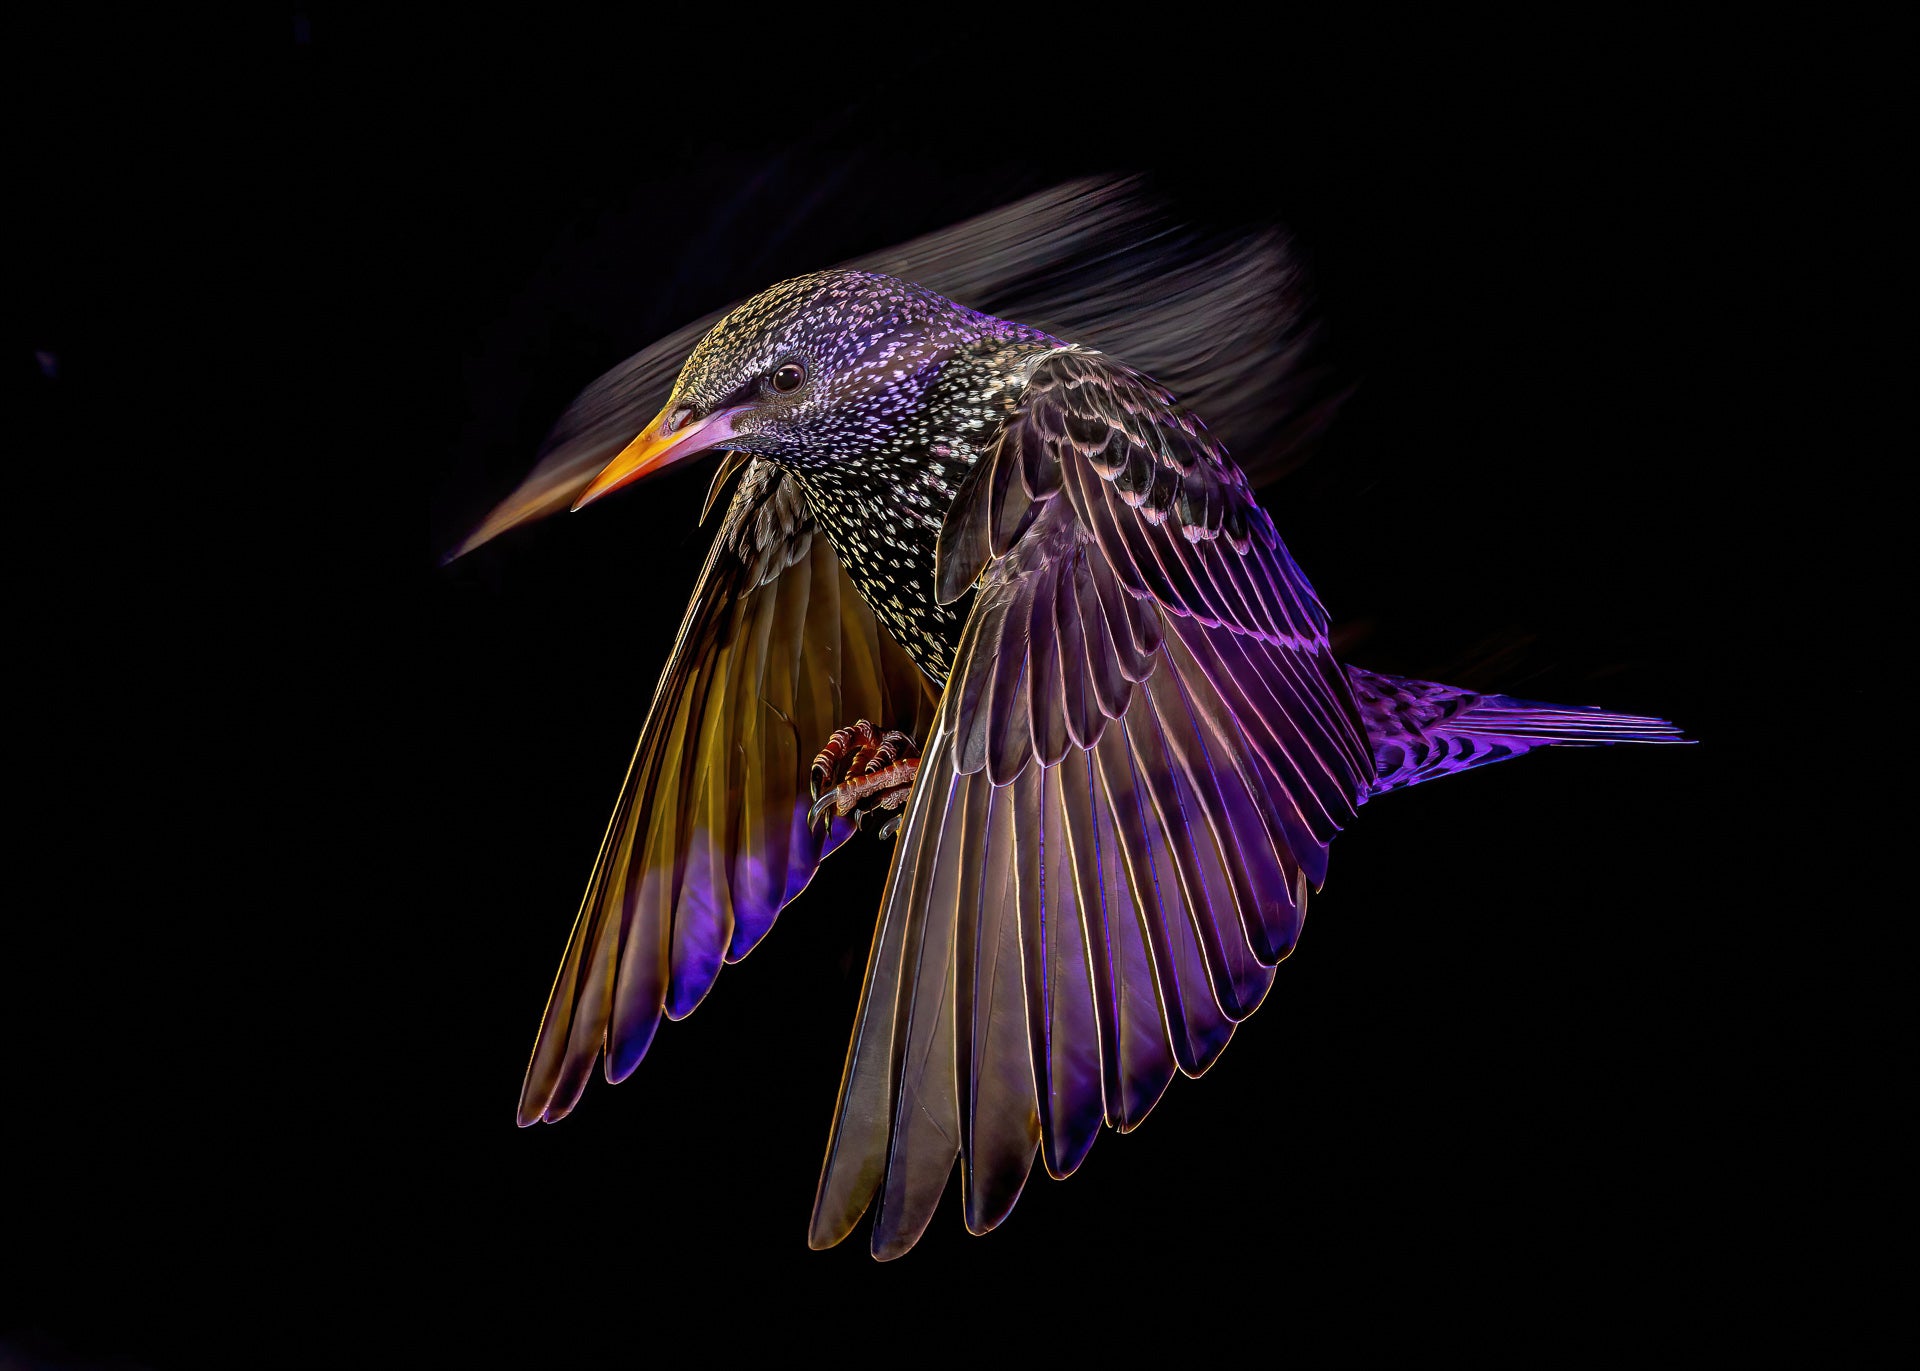 A starling swoops towards a feeder at night. (Photo: Mark Williams)